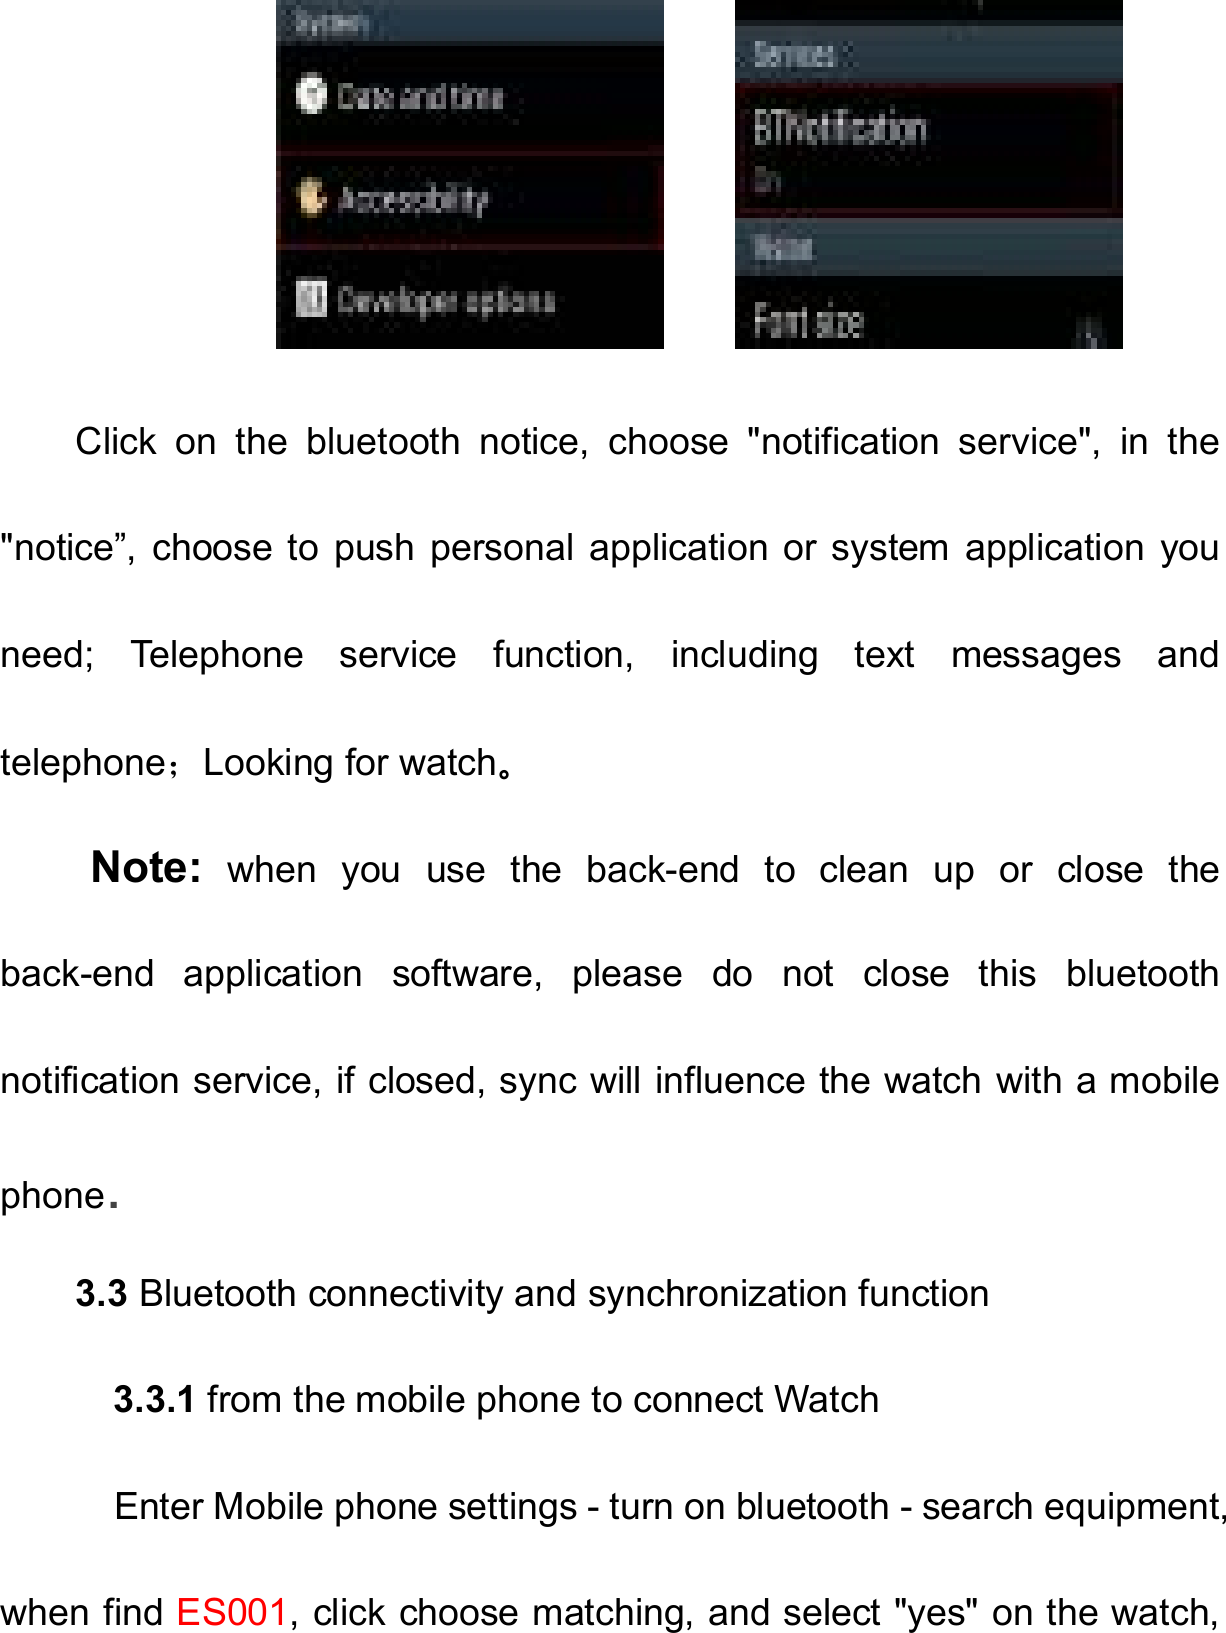        Click  on  the  bluetooth  notice,  choose  &quot;notification  service&quot;,  in  the &quot;notice”, choose to  push  personal  application or  system application you need;  Telephone  service  function,  including  text  messages  and telephone；Looking for watch。 Note:  when  you  use  the  back-end  to  clean  up  or  close  the back-end  application  software,  please  do  not  close  this  bluetooth notification service, if closed, sync will influence the watch with a mobile phone. 3.3 Bluetooth connectivity and synchronization function       3.3.1 from the mobile phone to connect Watch       Enter Mobile phone settings - turn on bluetooth - search equipment, when find ES001, click choose matching, and select &quot;yes&quot; on the watch, 